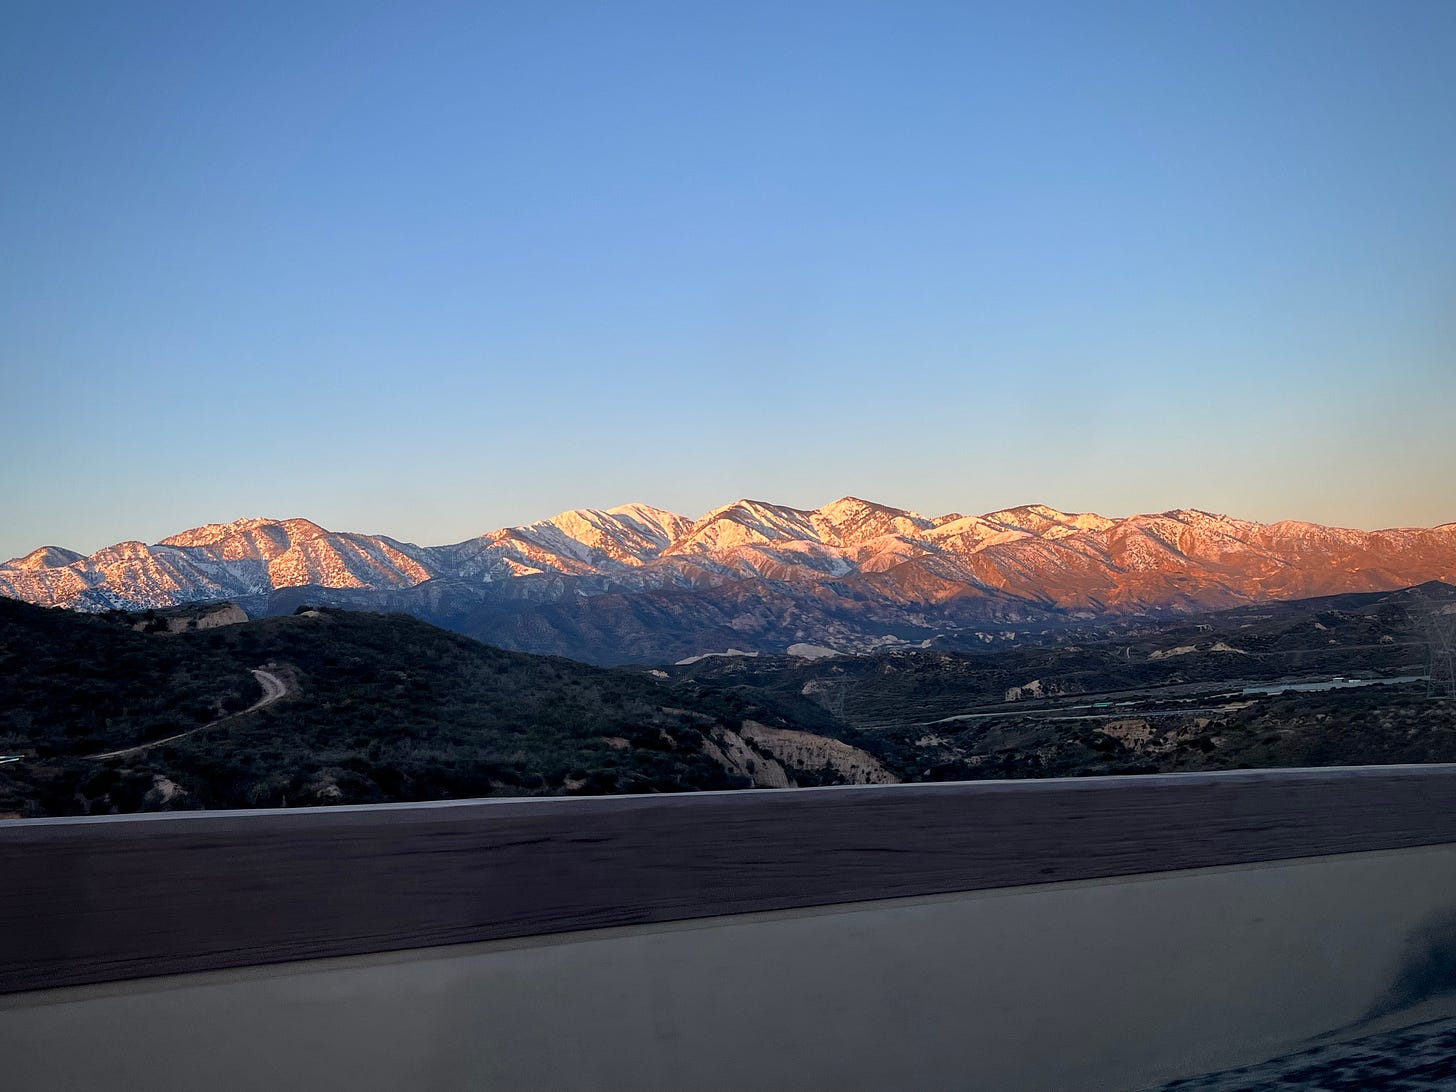 Periwinkle sky, a mountain range (peaks coated in snow), and below them hills, highways, and the side of the road we're driving on. It's sunrise, so the mountains are illuminated in gold light in the top parts.